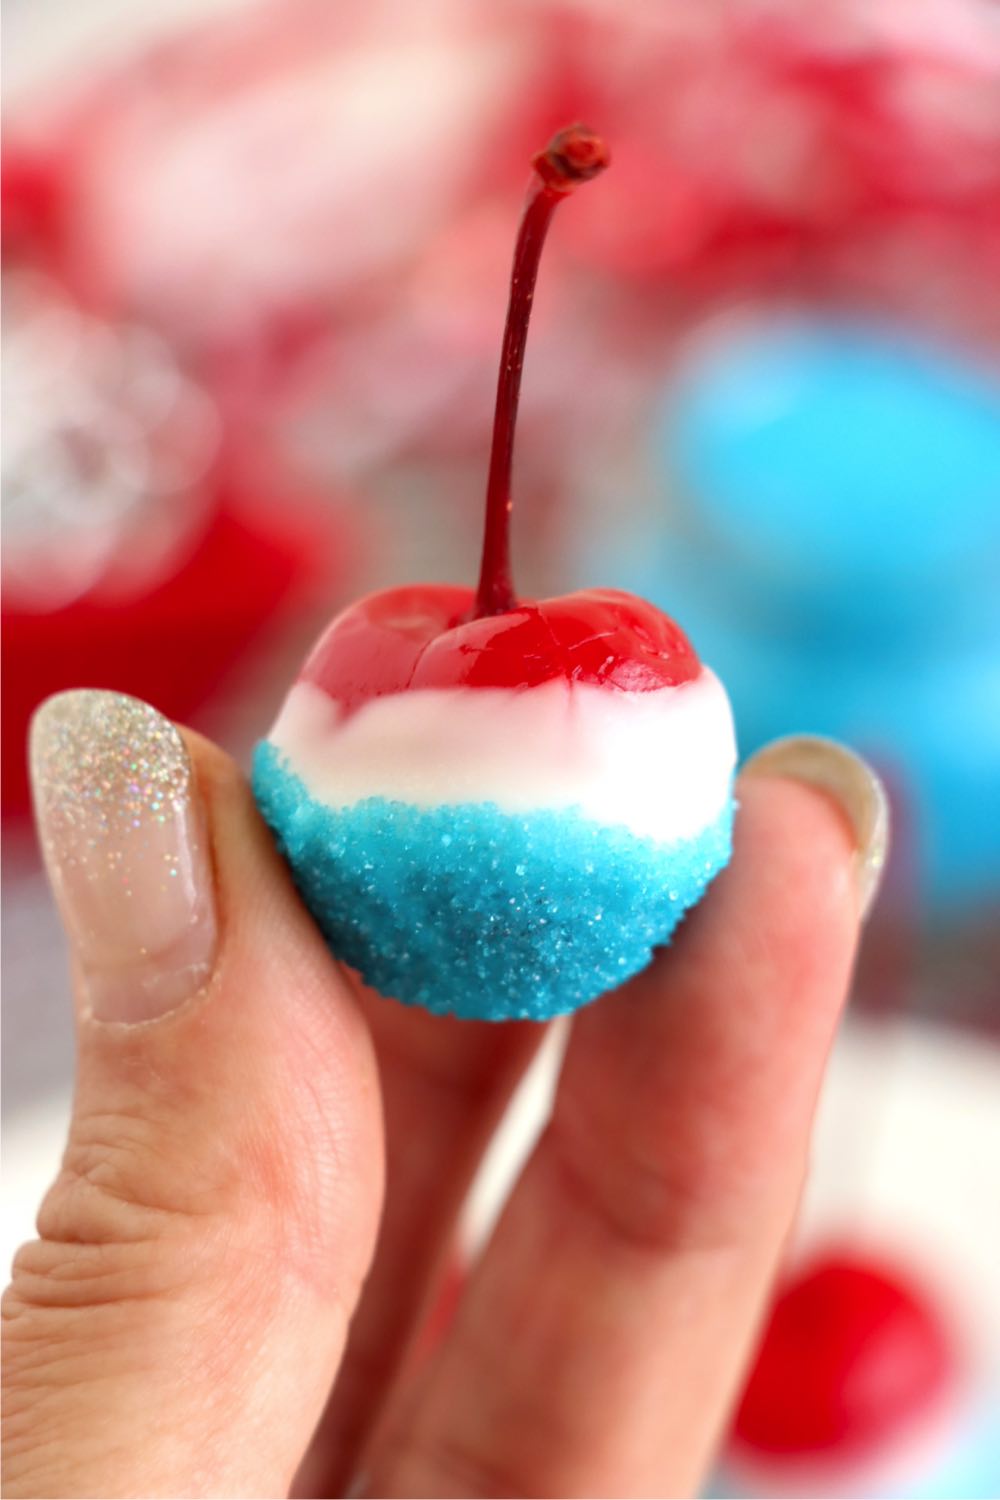 Fingers holding a red, white and blue cherry with stem.